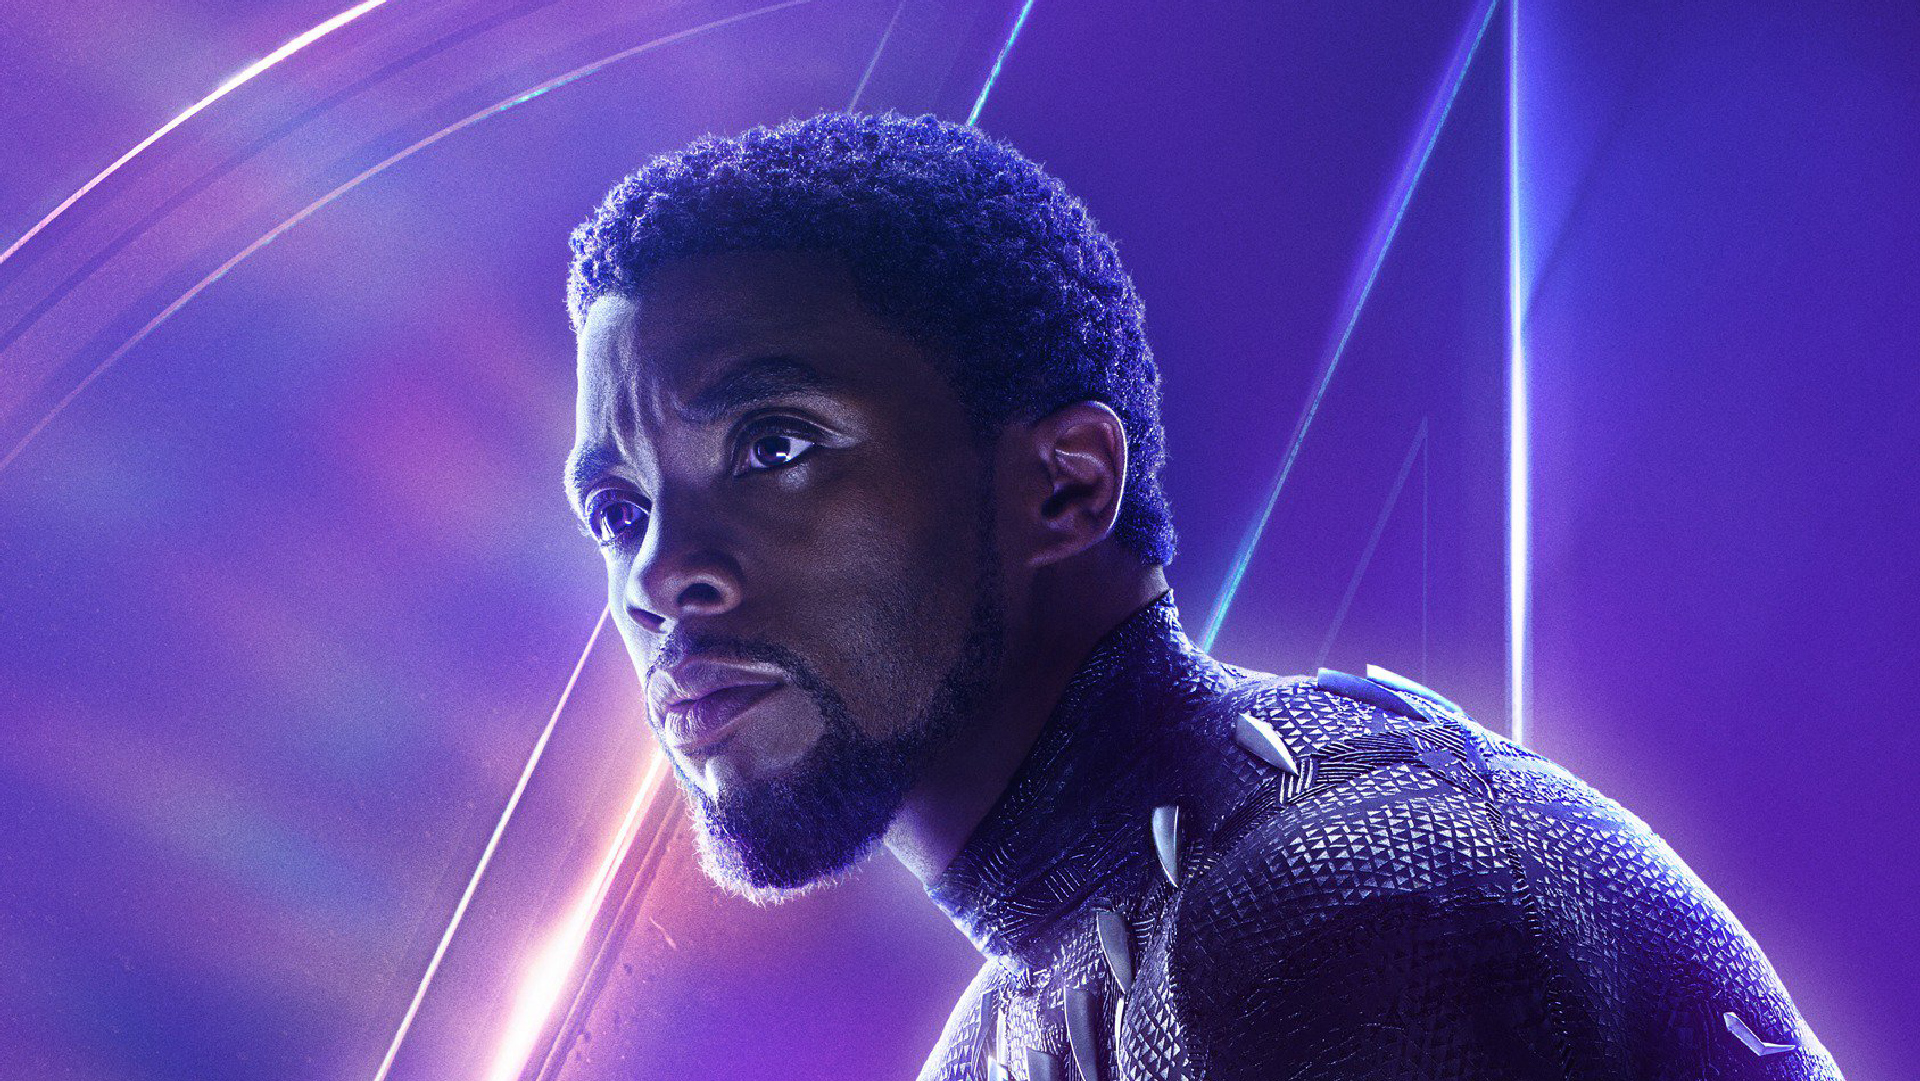 Black Panther In Avengers Infinity War New Poster Hd Movies 4k